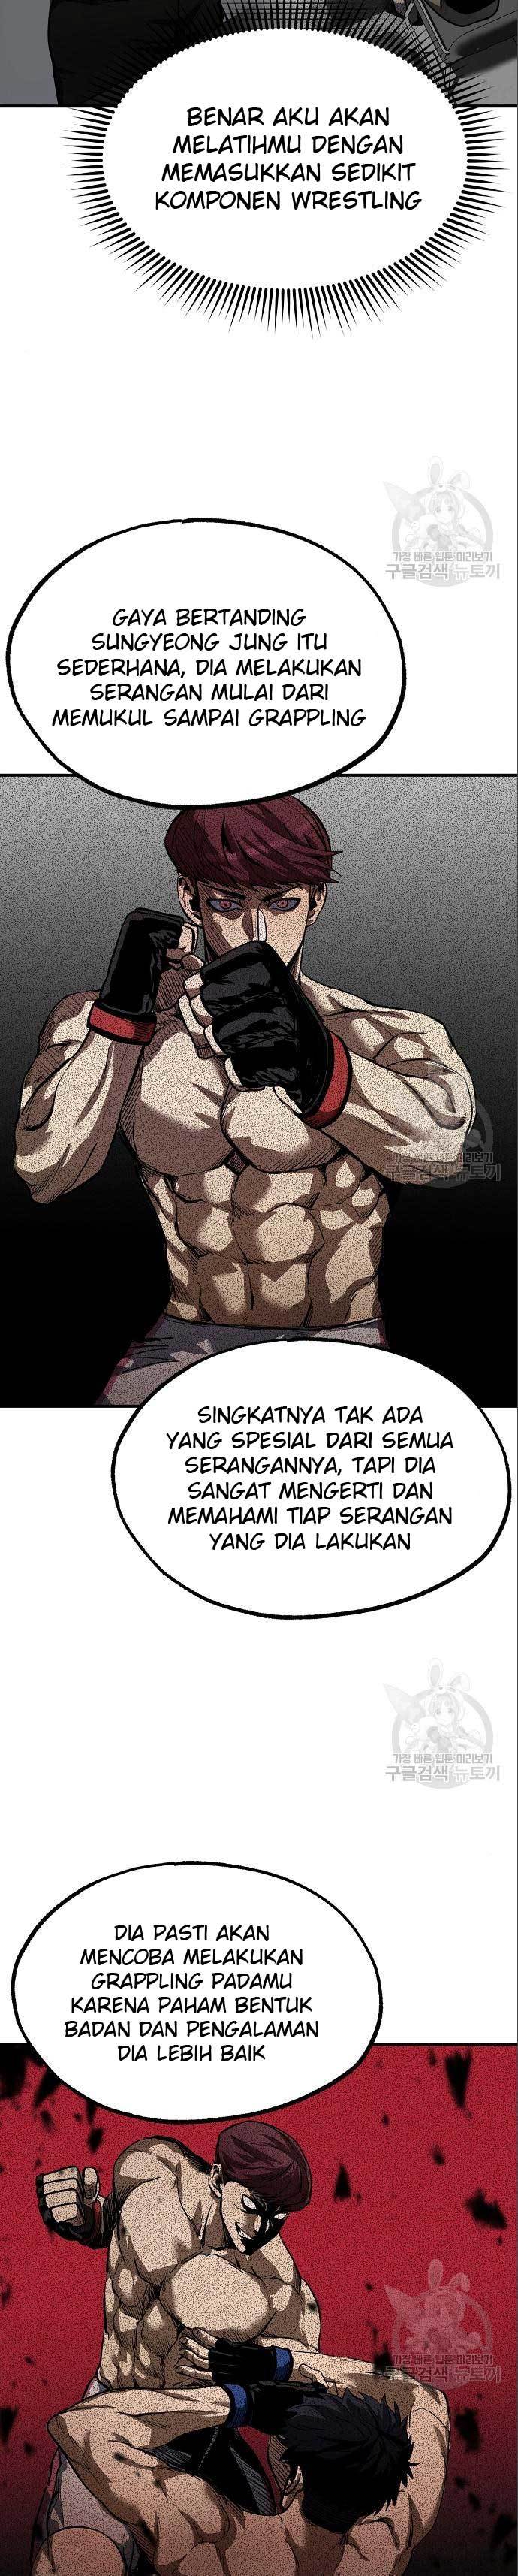 King Mma Chapter 13 - 211